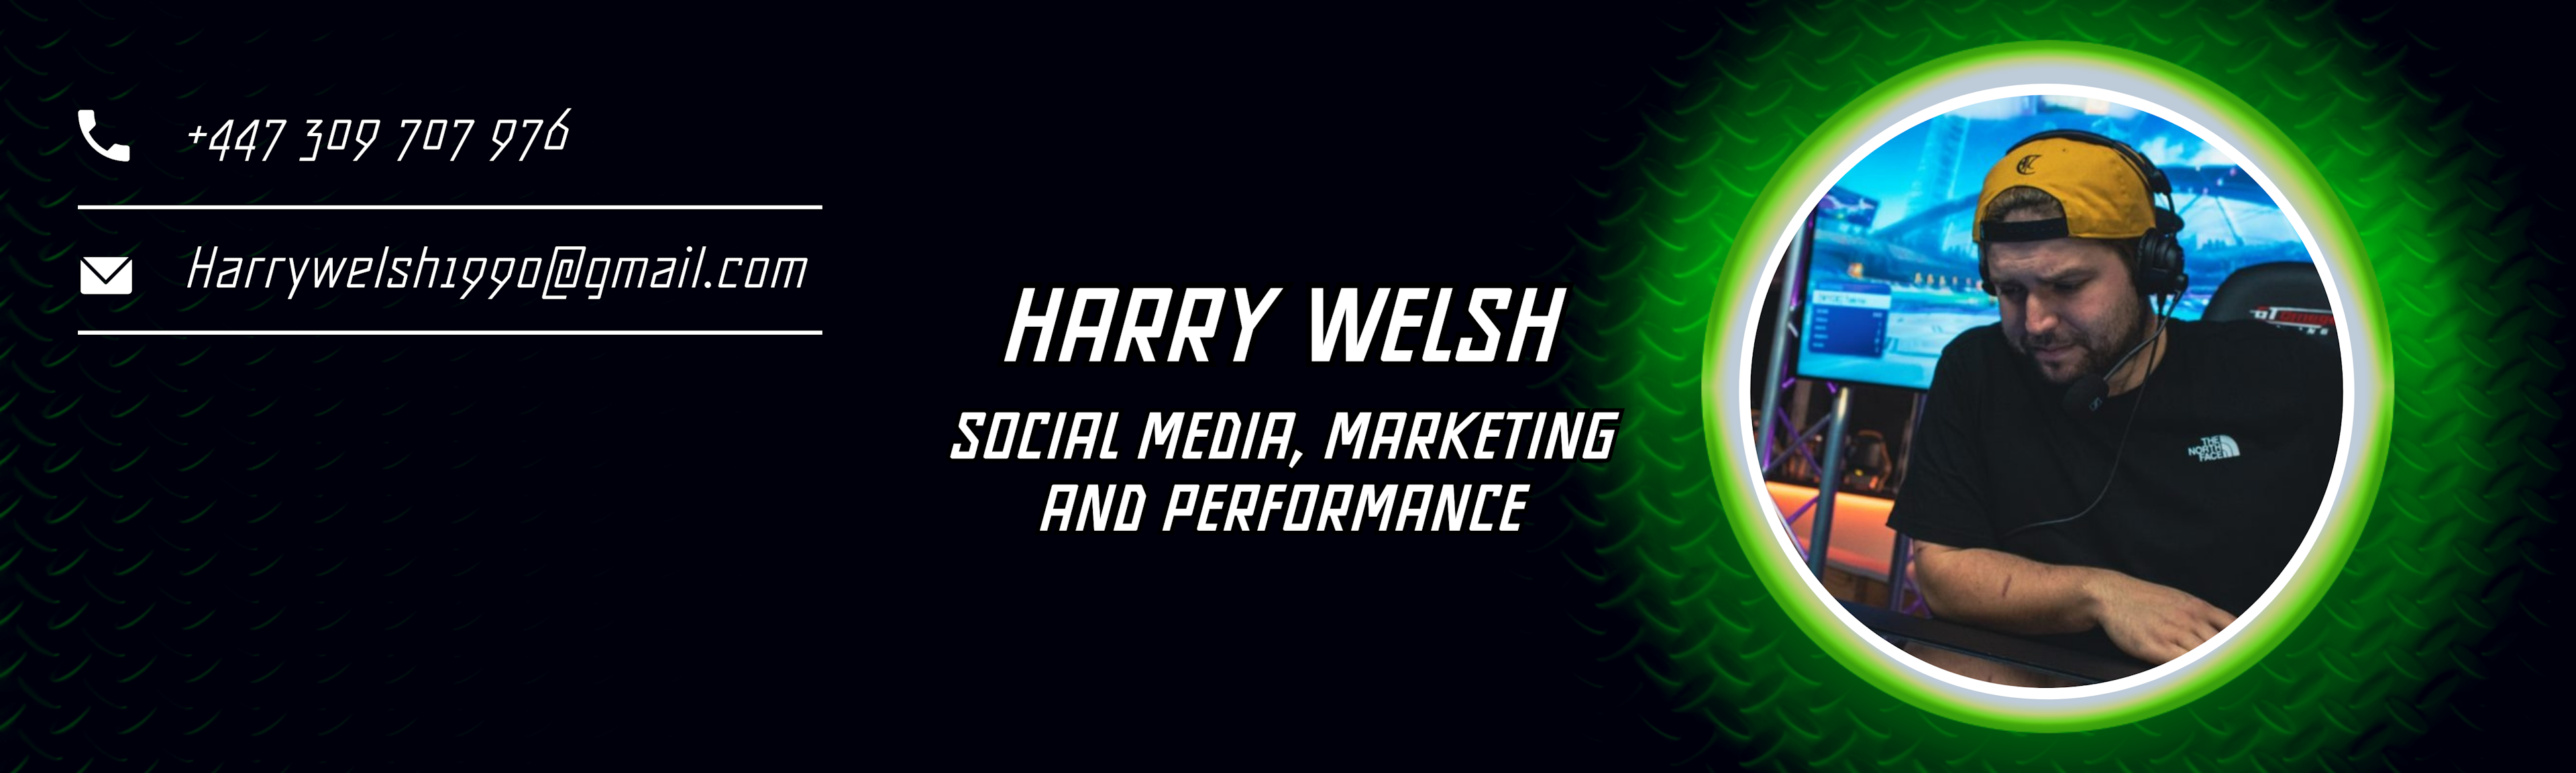 Harry Welsh's cover image